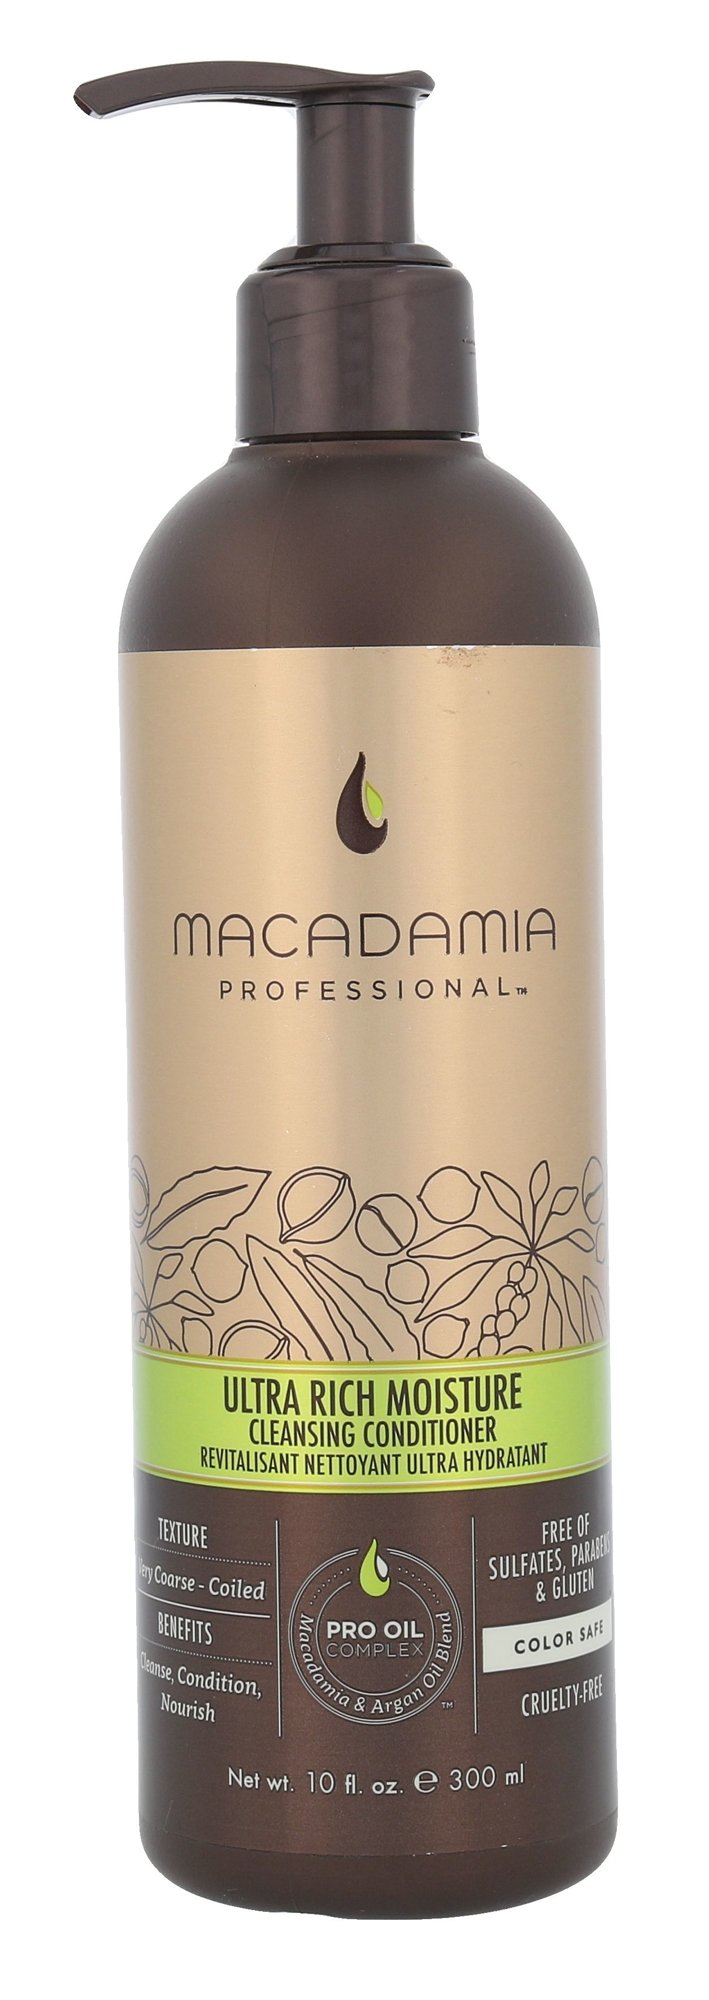 Macadamia Ultra Rich Moisture Cleansing Conditioner